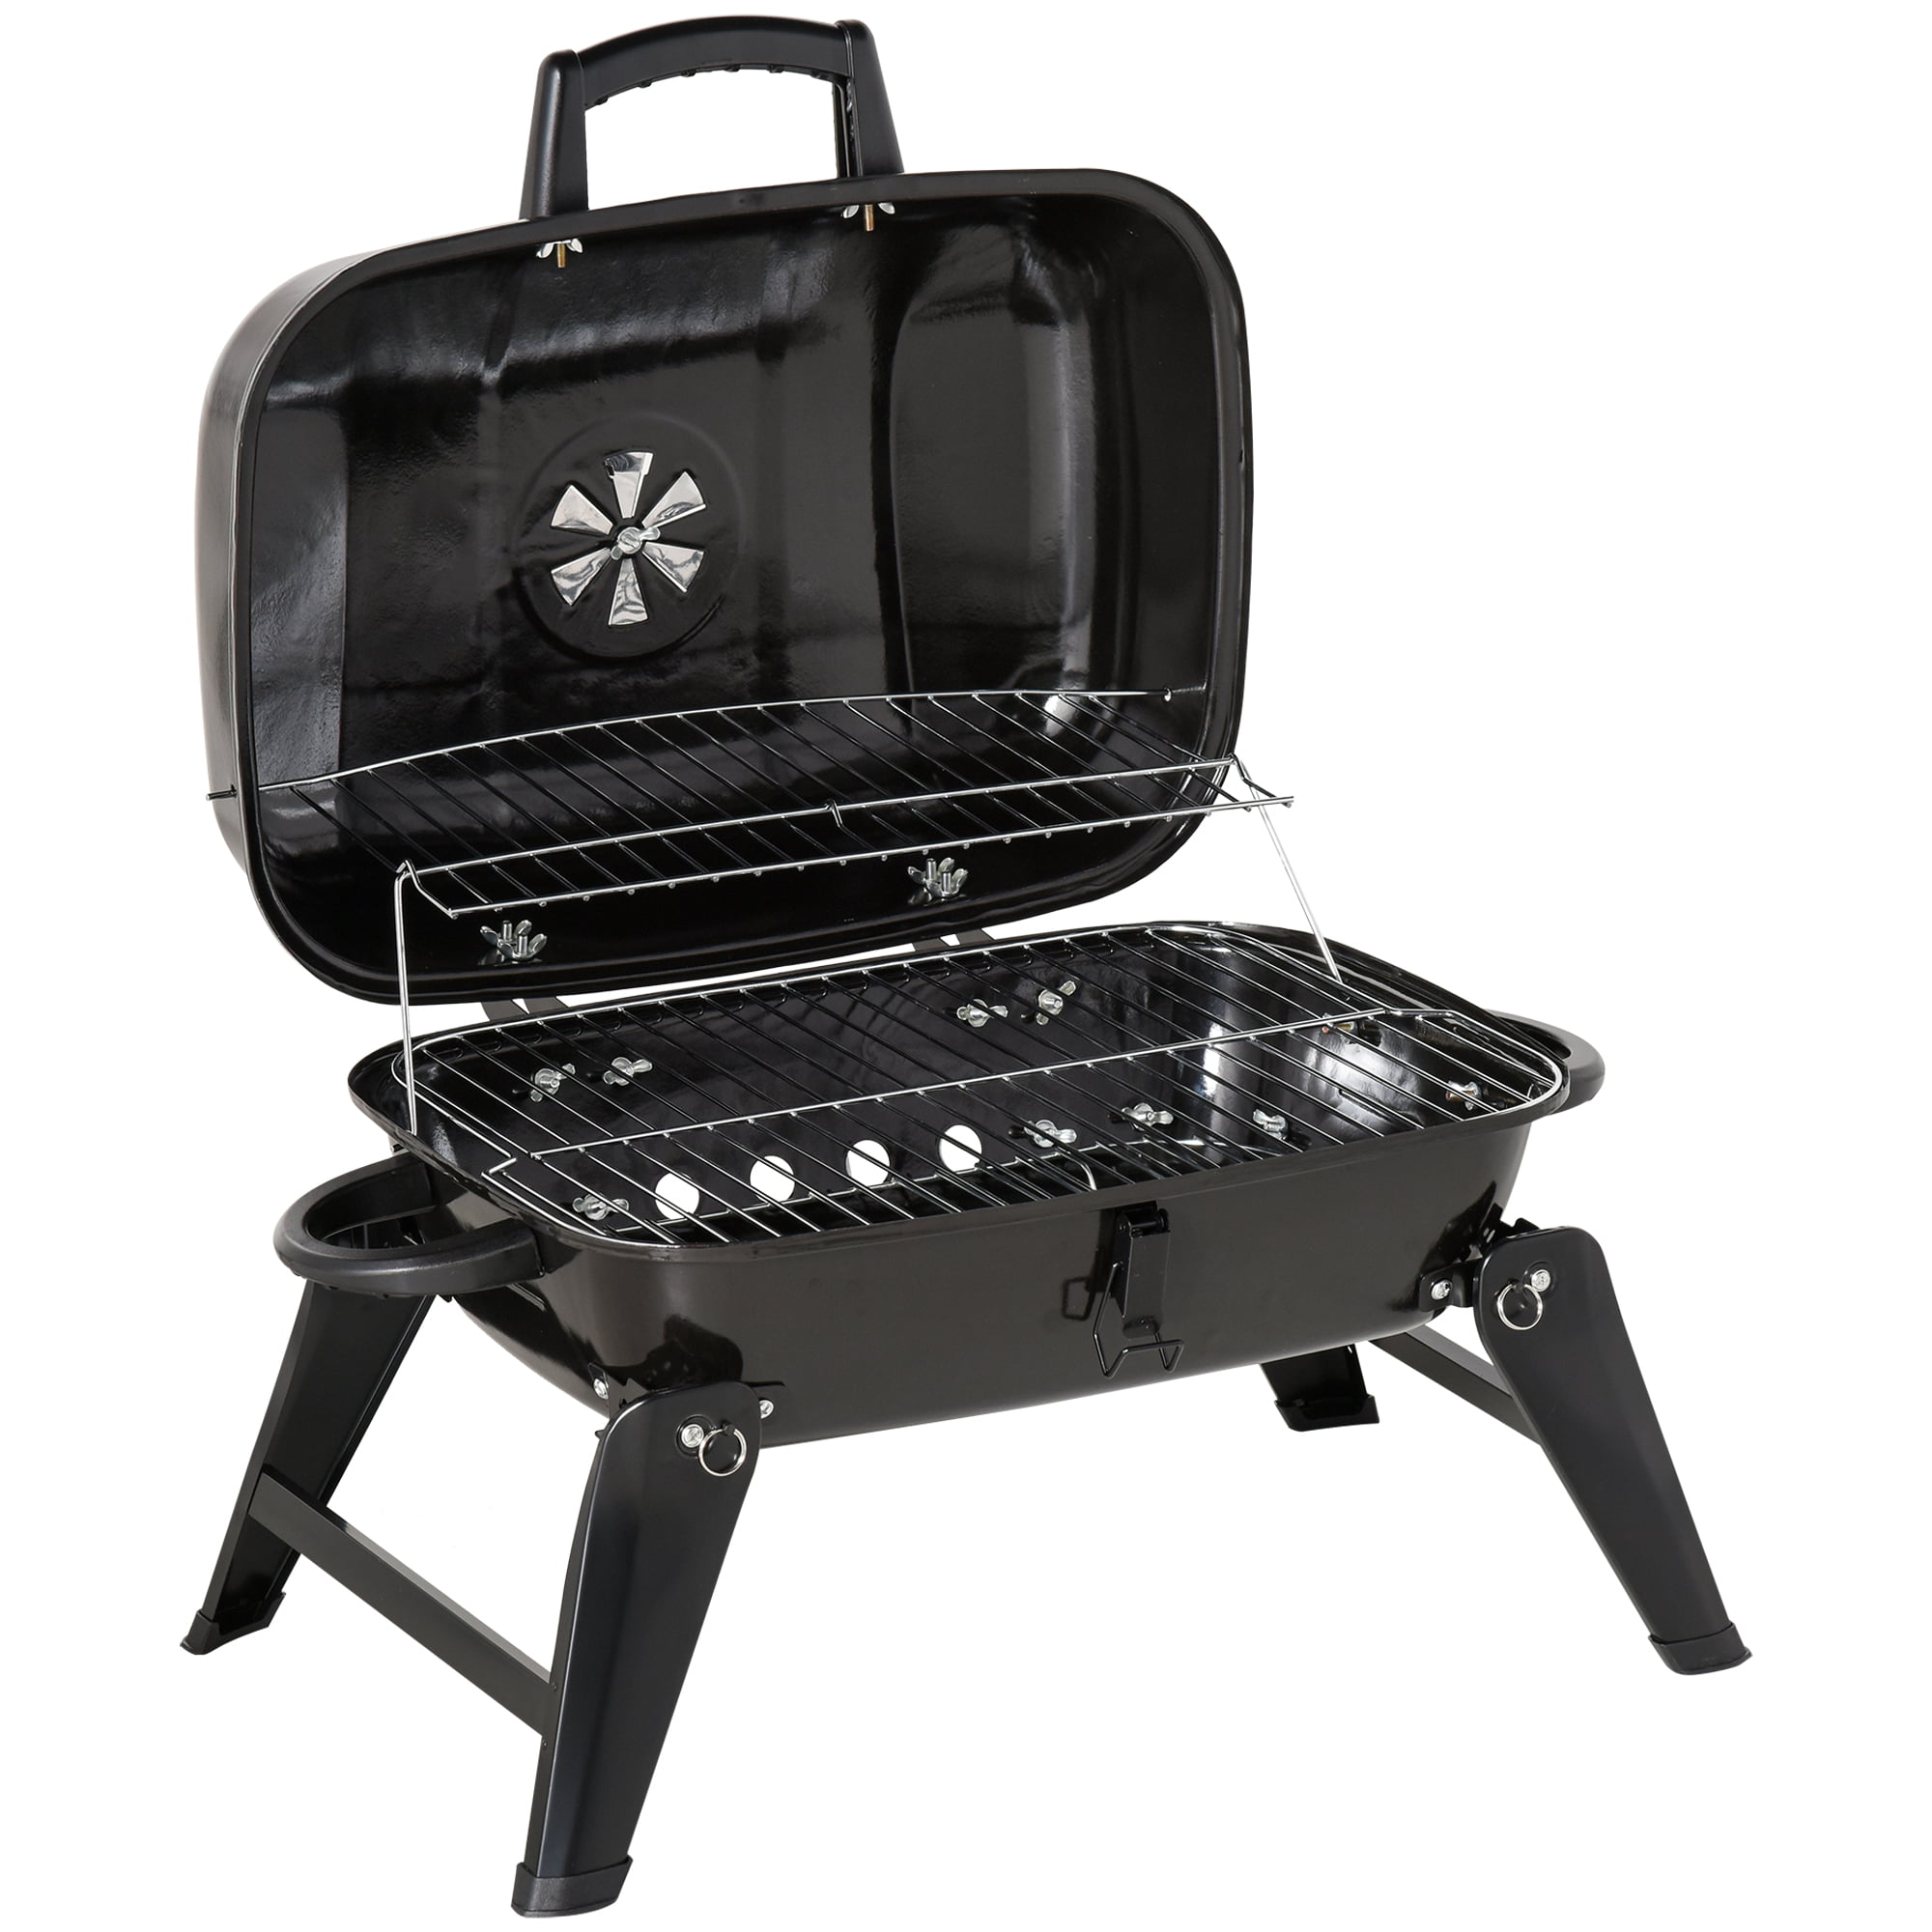 Storm Black Protector 5000 Kettle Barbecue Cover 